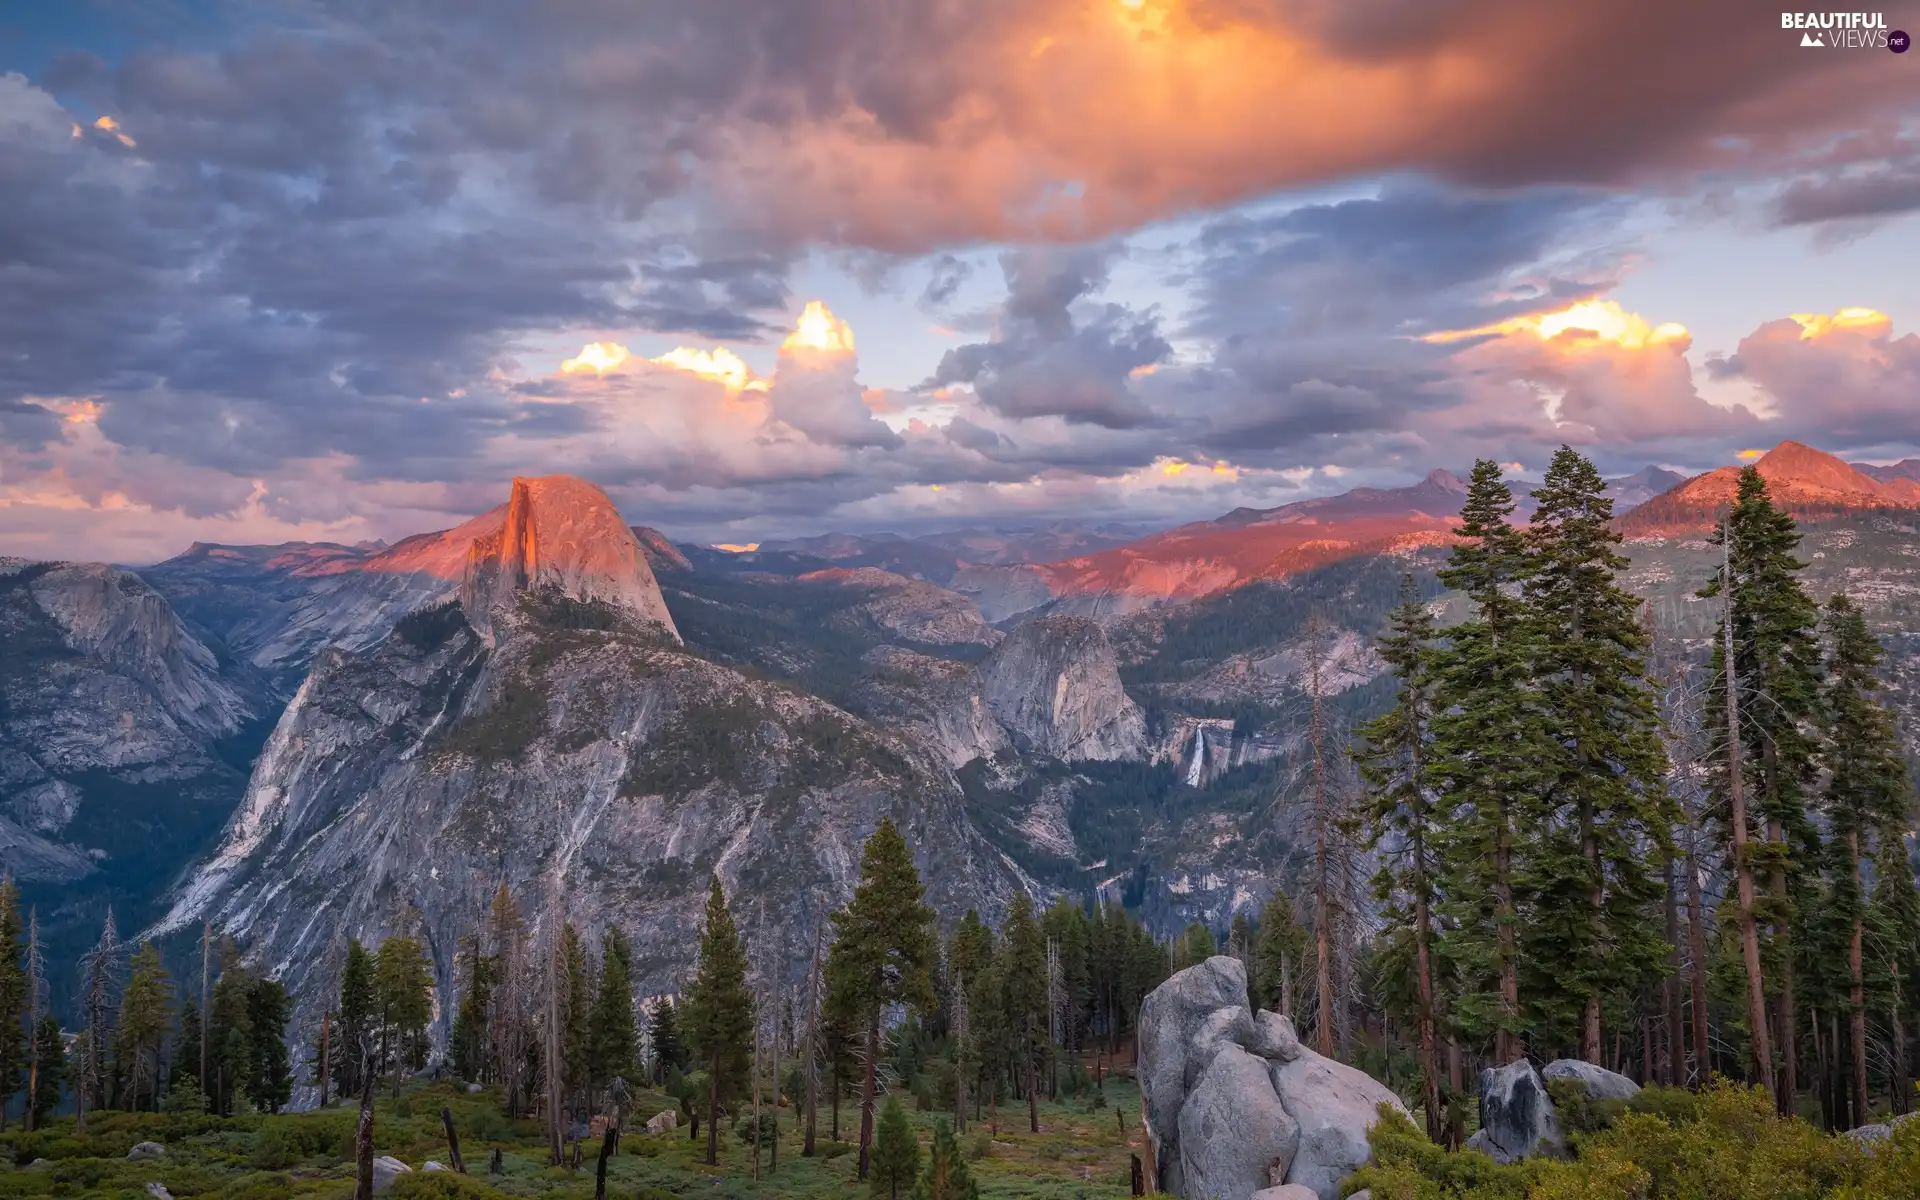 State of California, The United States, Yosemite National Park, trees, Sierra Nevada, clouds, Rocky, Mountains, viewes